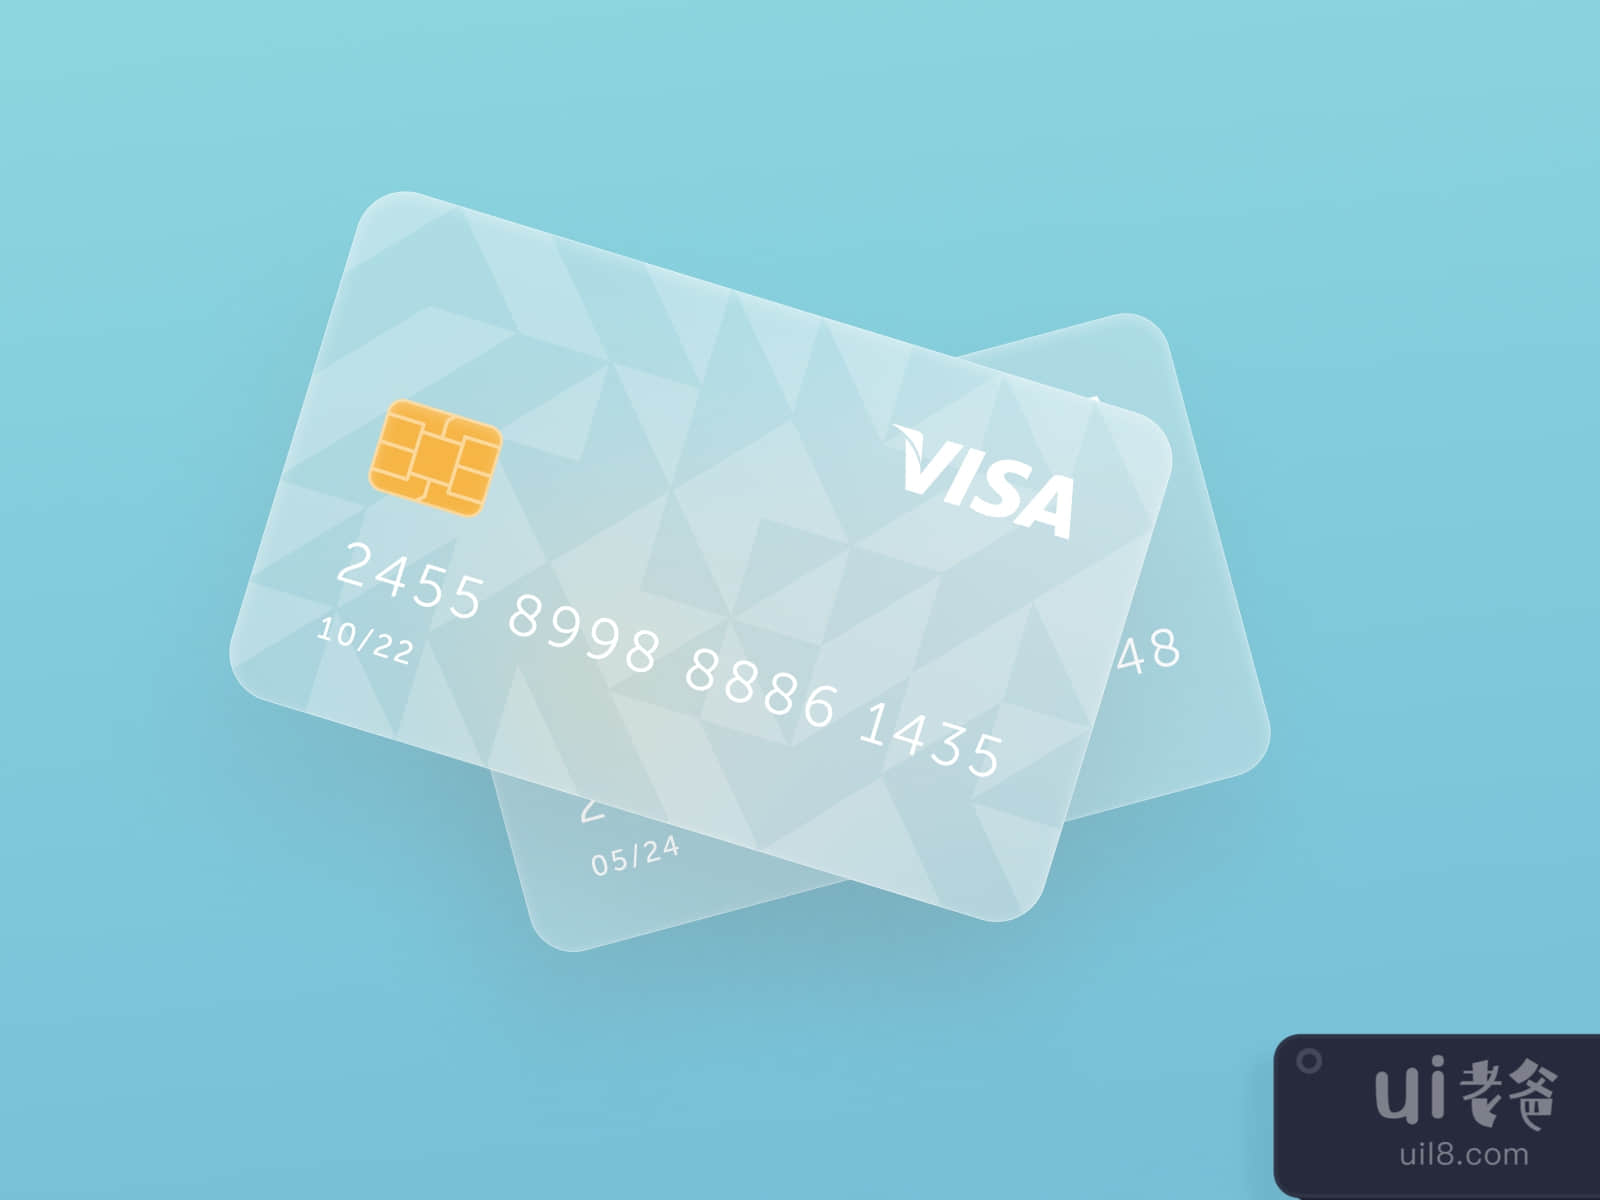 Neumorphic Bank Card for Figma and Adobe XD No 2